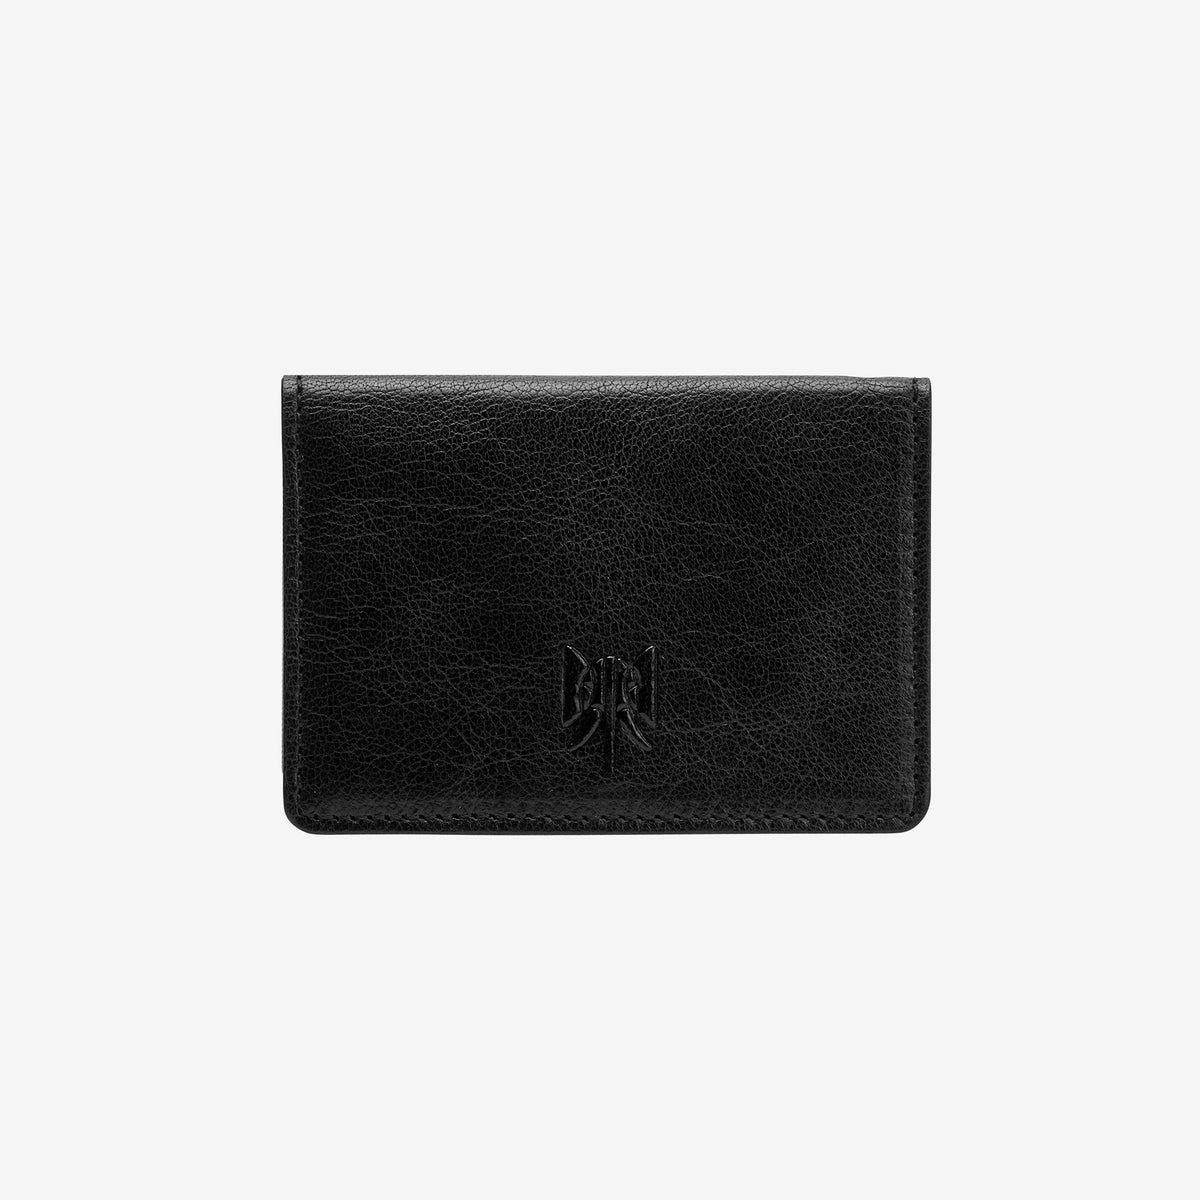       tusk-138-womens-siam-leather-gusseted-card-case-black-and-french-blue-front